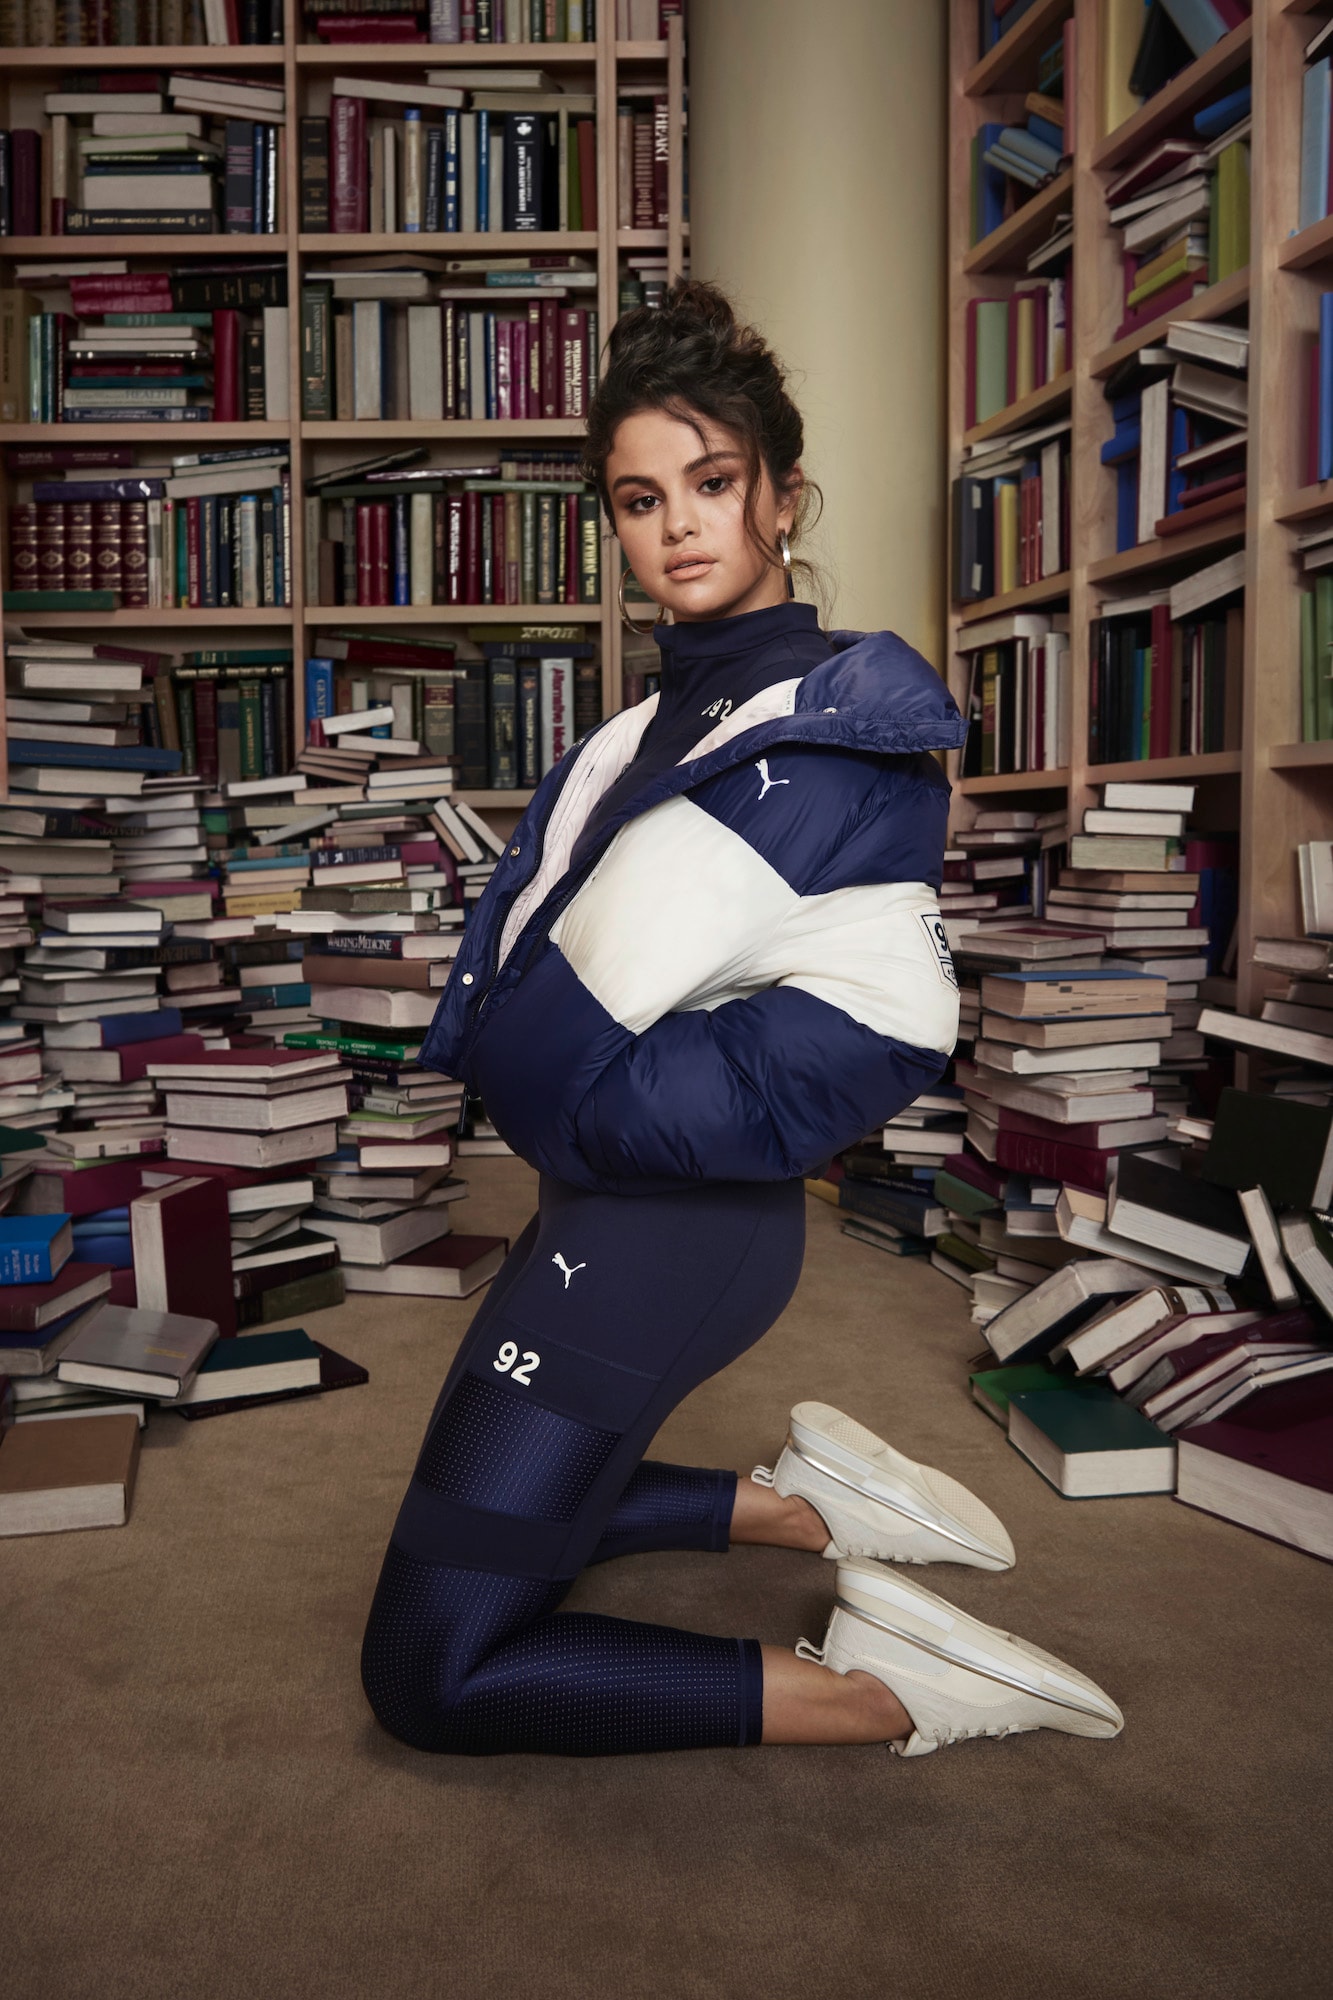 Selena Gomez PUMA Collaboration Campaign FW19 PUMA Cali Suede Collection Apparel Rugby Inspired Release Date